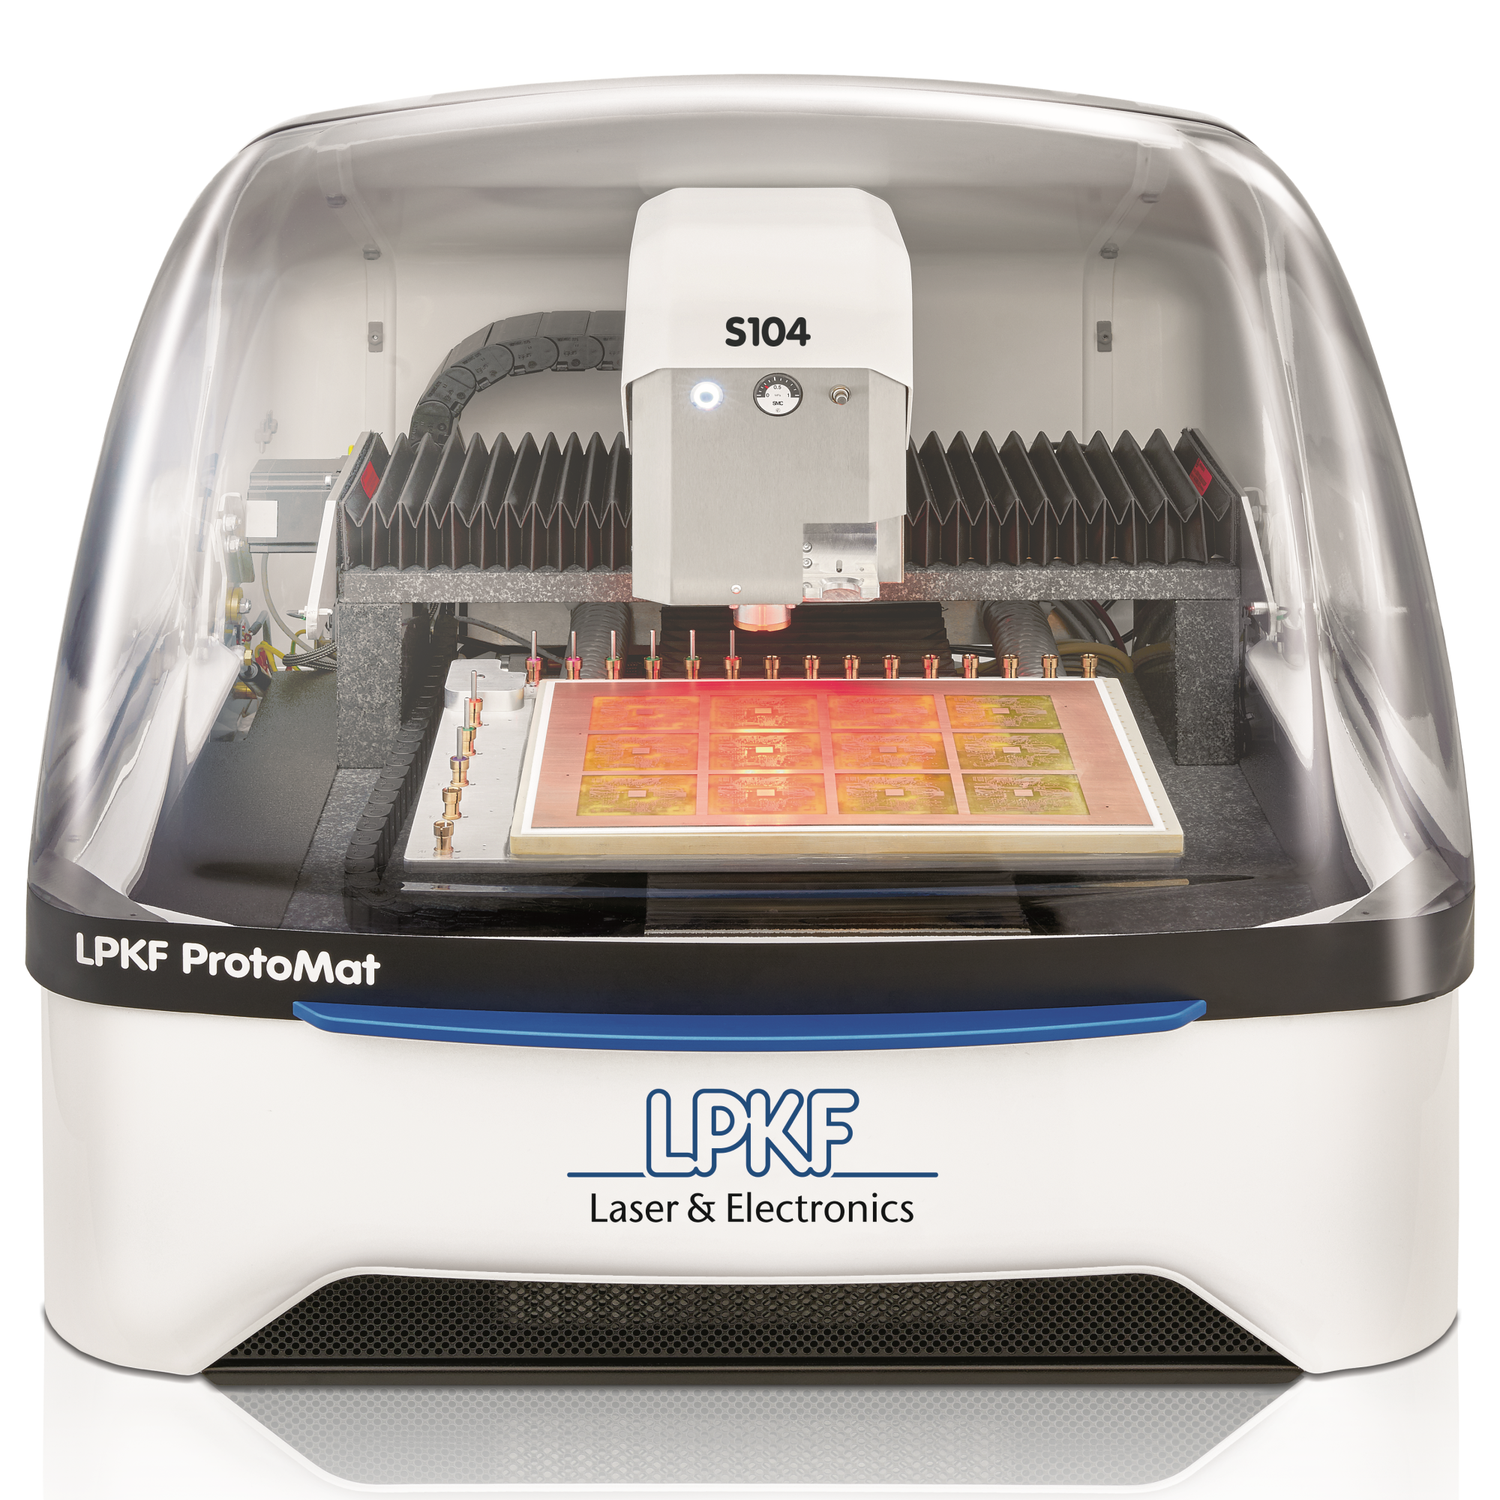 LPKF Protomat S104 PCB Prototyping Machine front view - Sensor-controlled, material and copper thickness are measured automatically to enable exact calculation of required milling depth